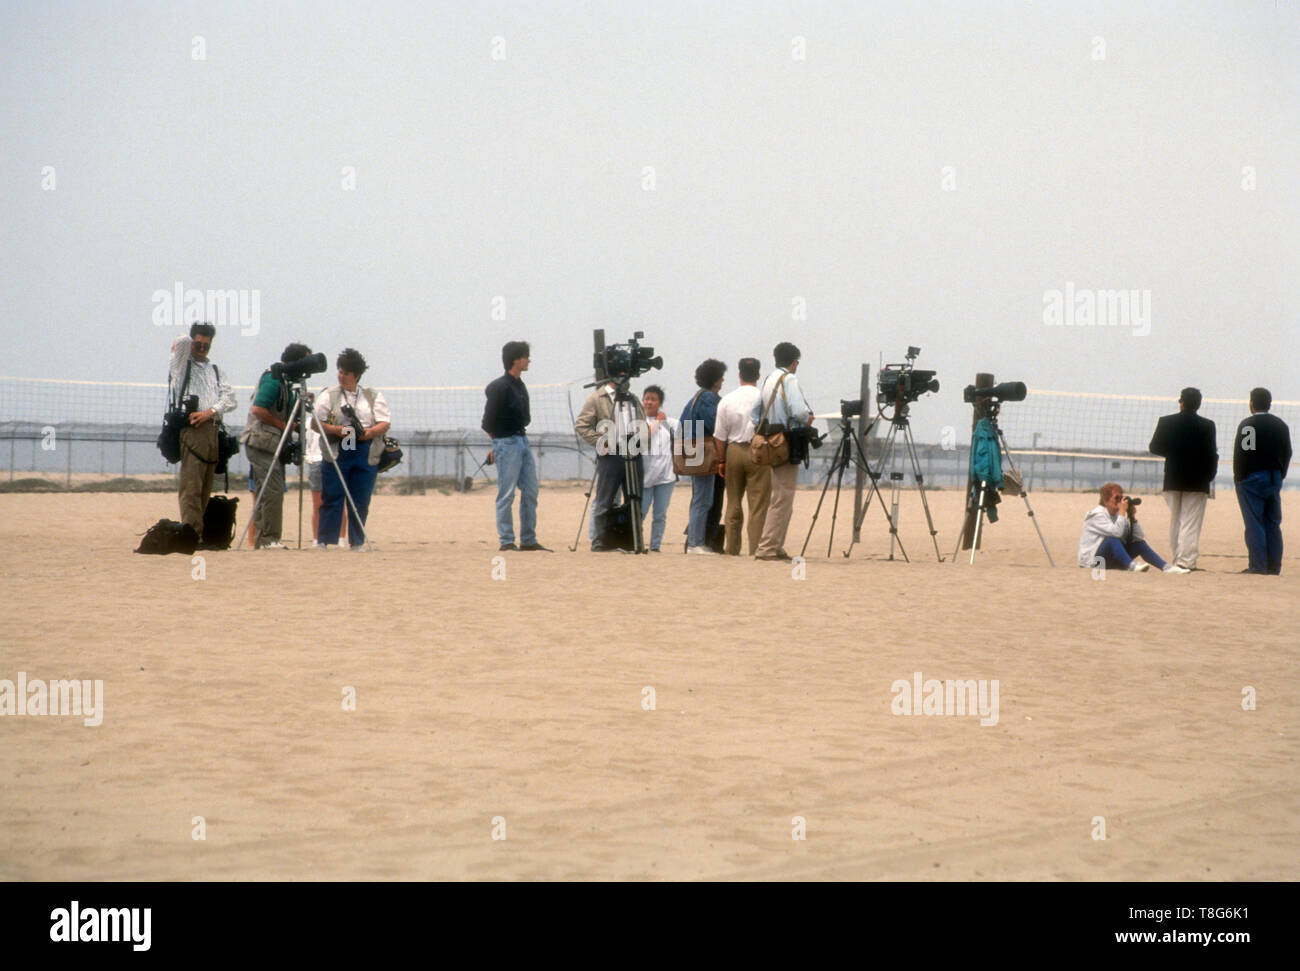 Marina del Rey, California, USA 16th April 1994  A general view of atmosphere of press at Actor Dudley Moore and his new bride, Nicole Rothschild greet photographers at their wedding on April 16, 1994 at Dudley Moore's Home, 5505 Ocean Front Walk in Marina del Rey, California, USA. Photo by Barry King/Alamy Stock Photo Stock Photo